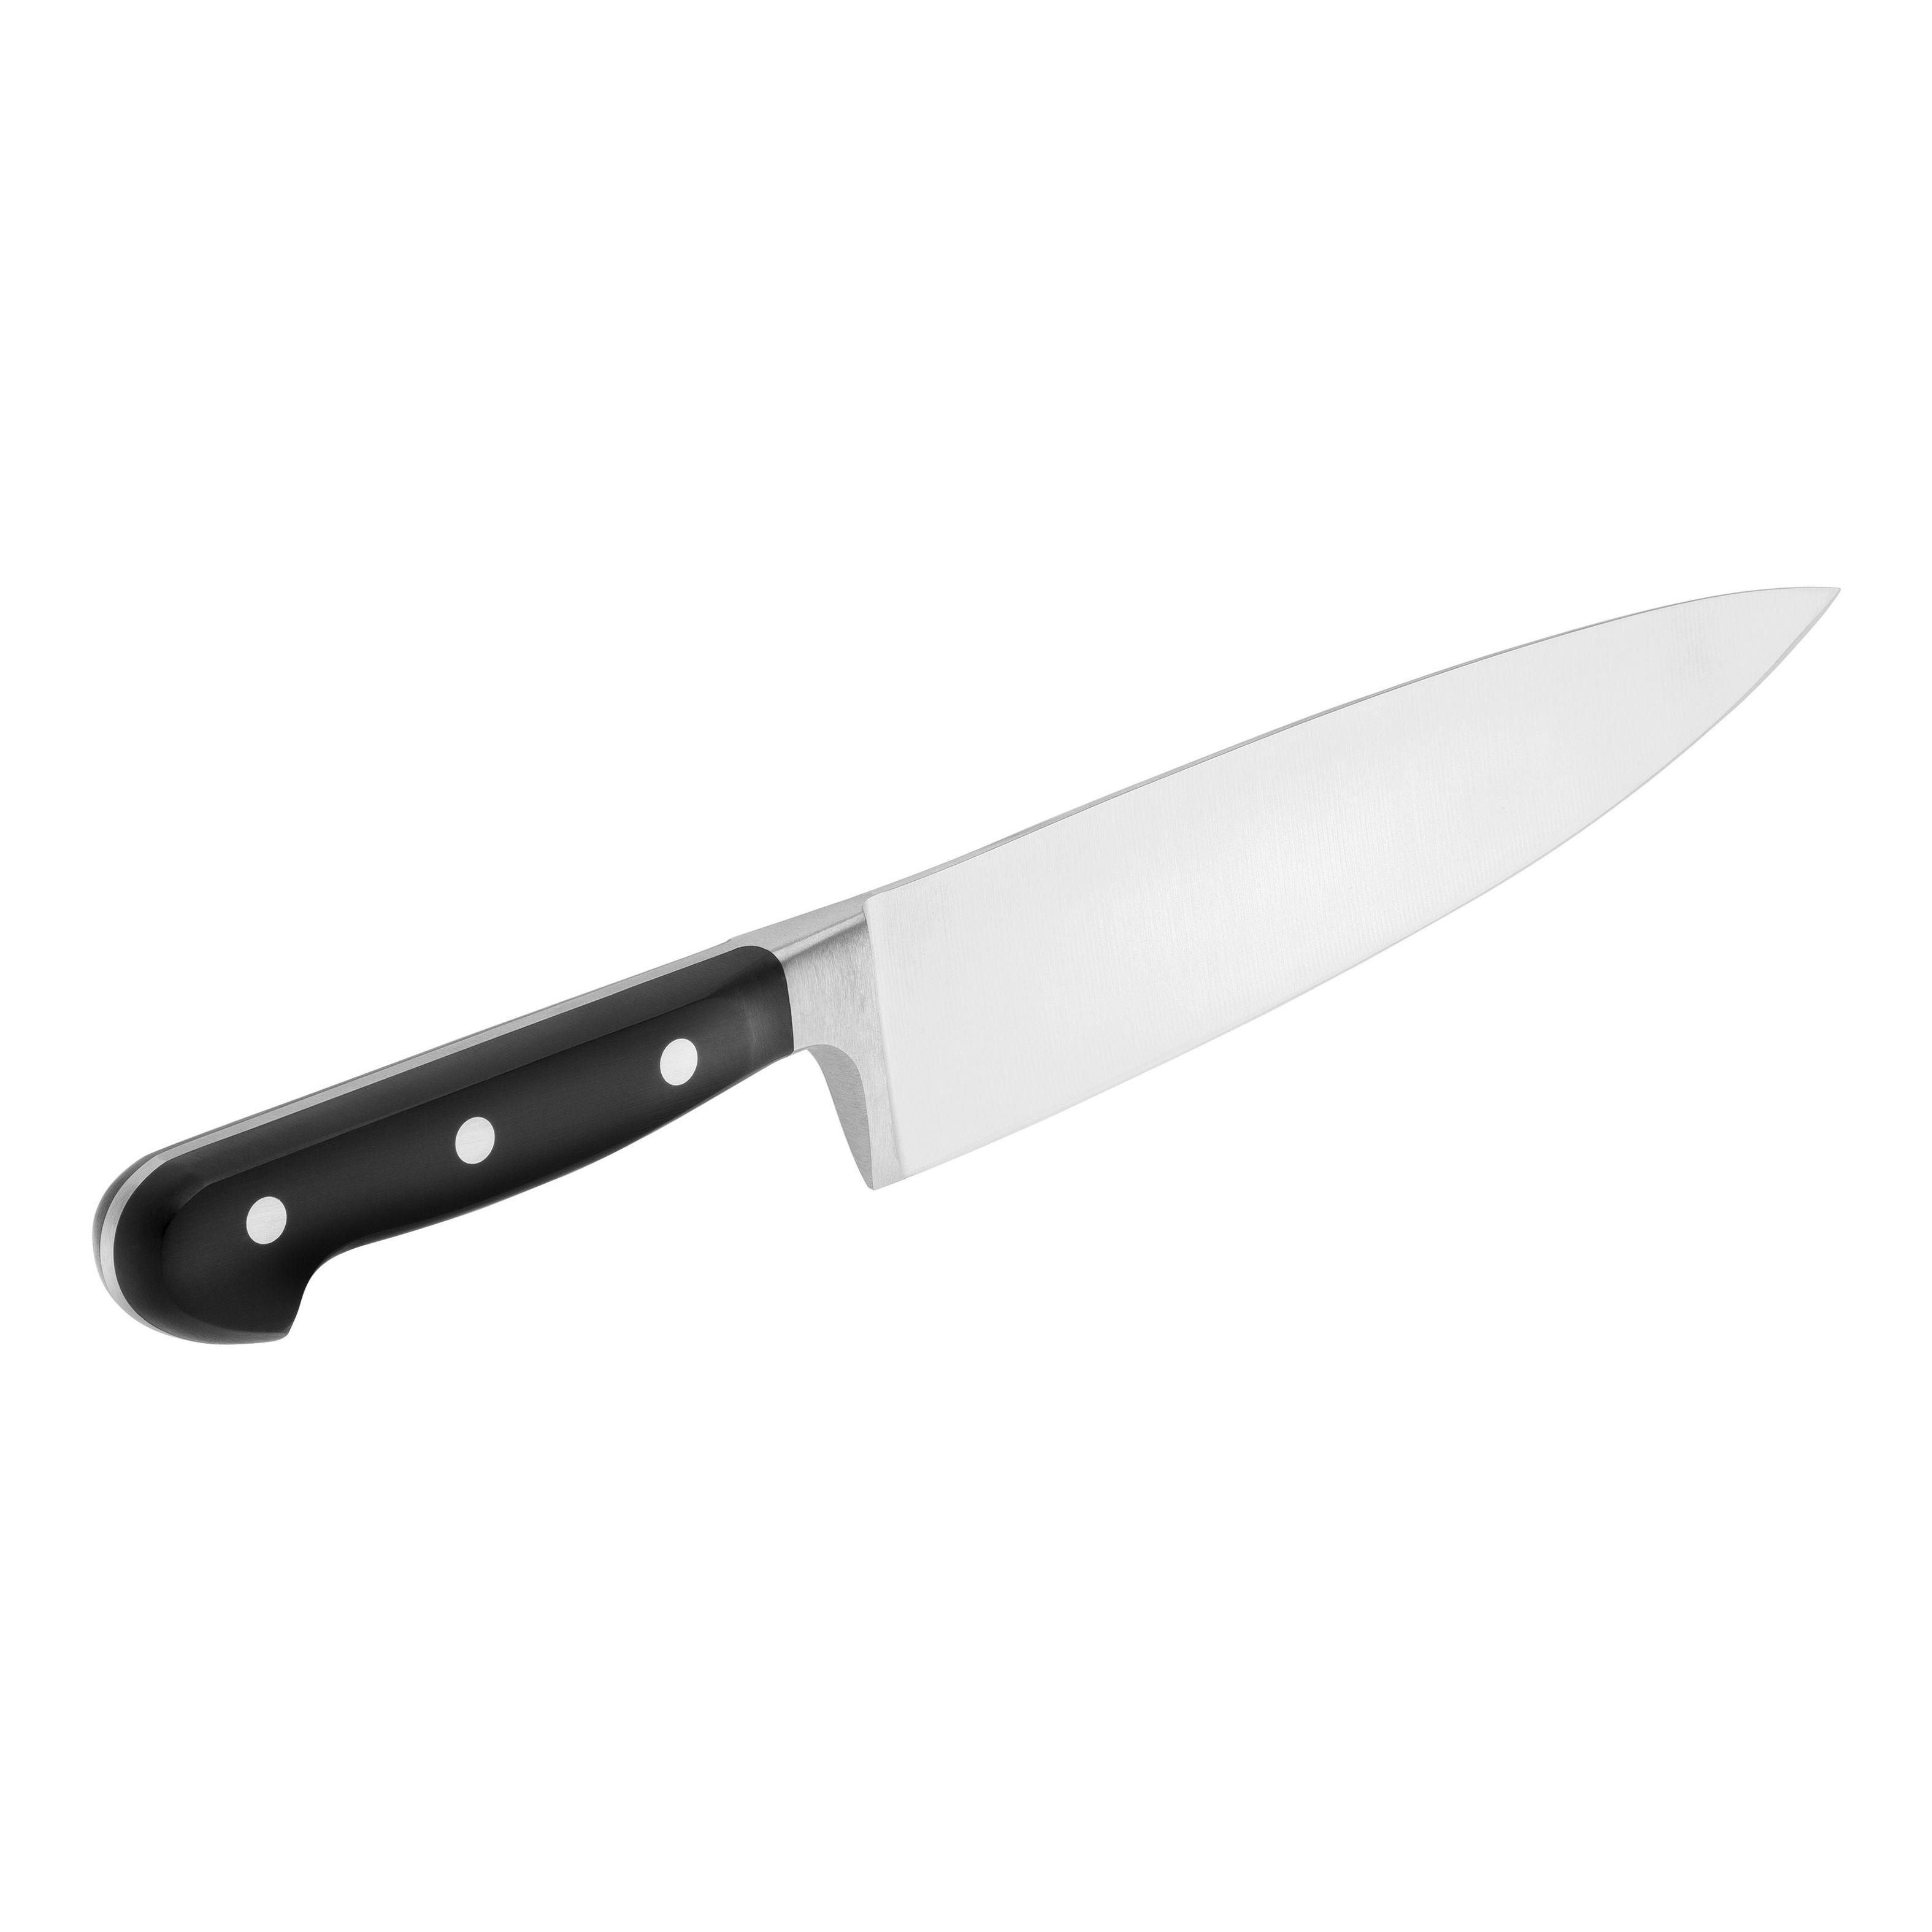 ZWILLING Professional S Chef's Knife 200 mm desde 79,96